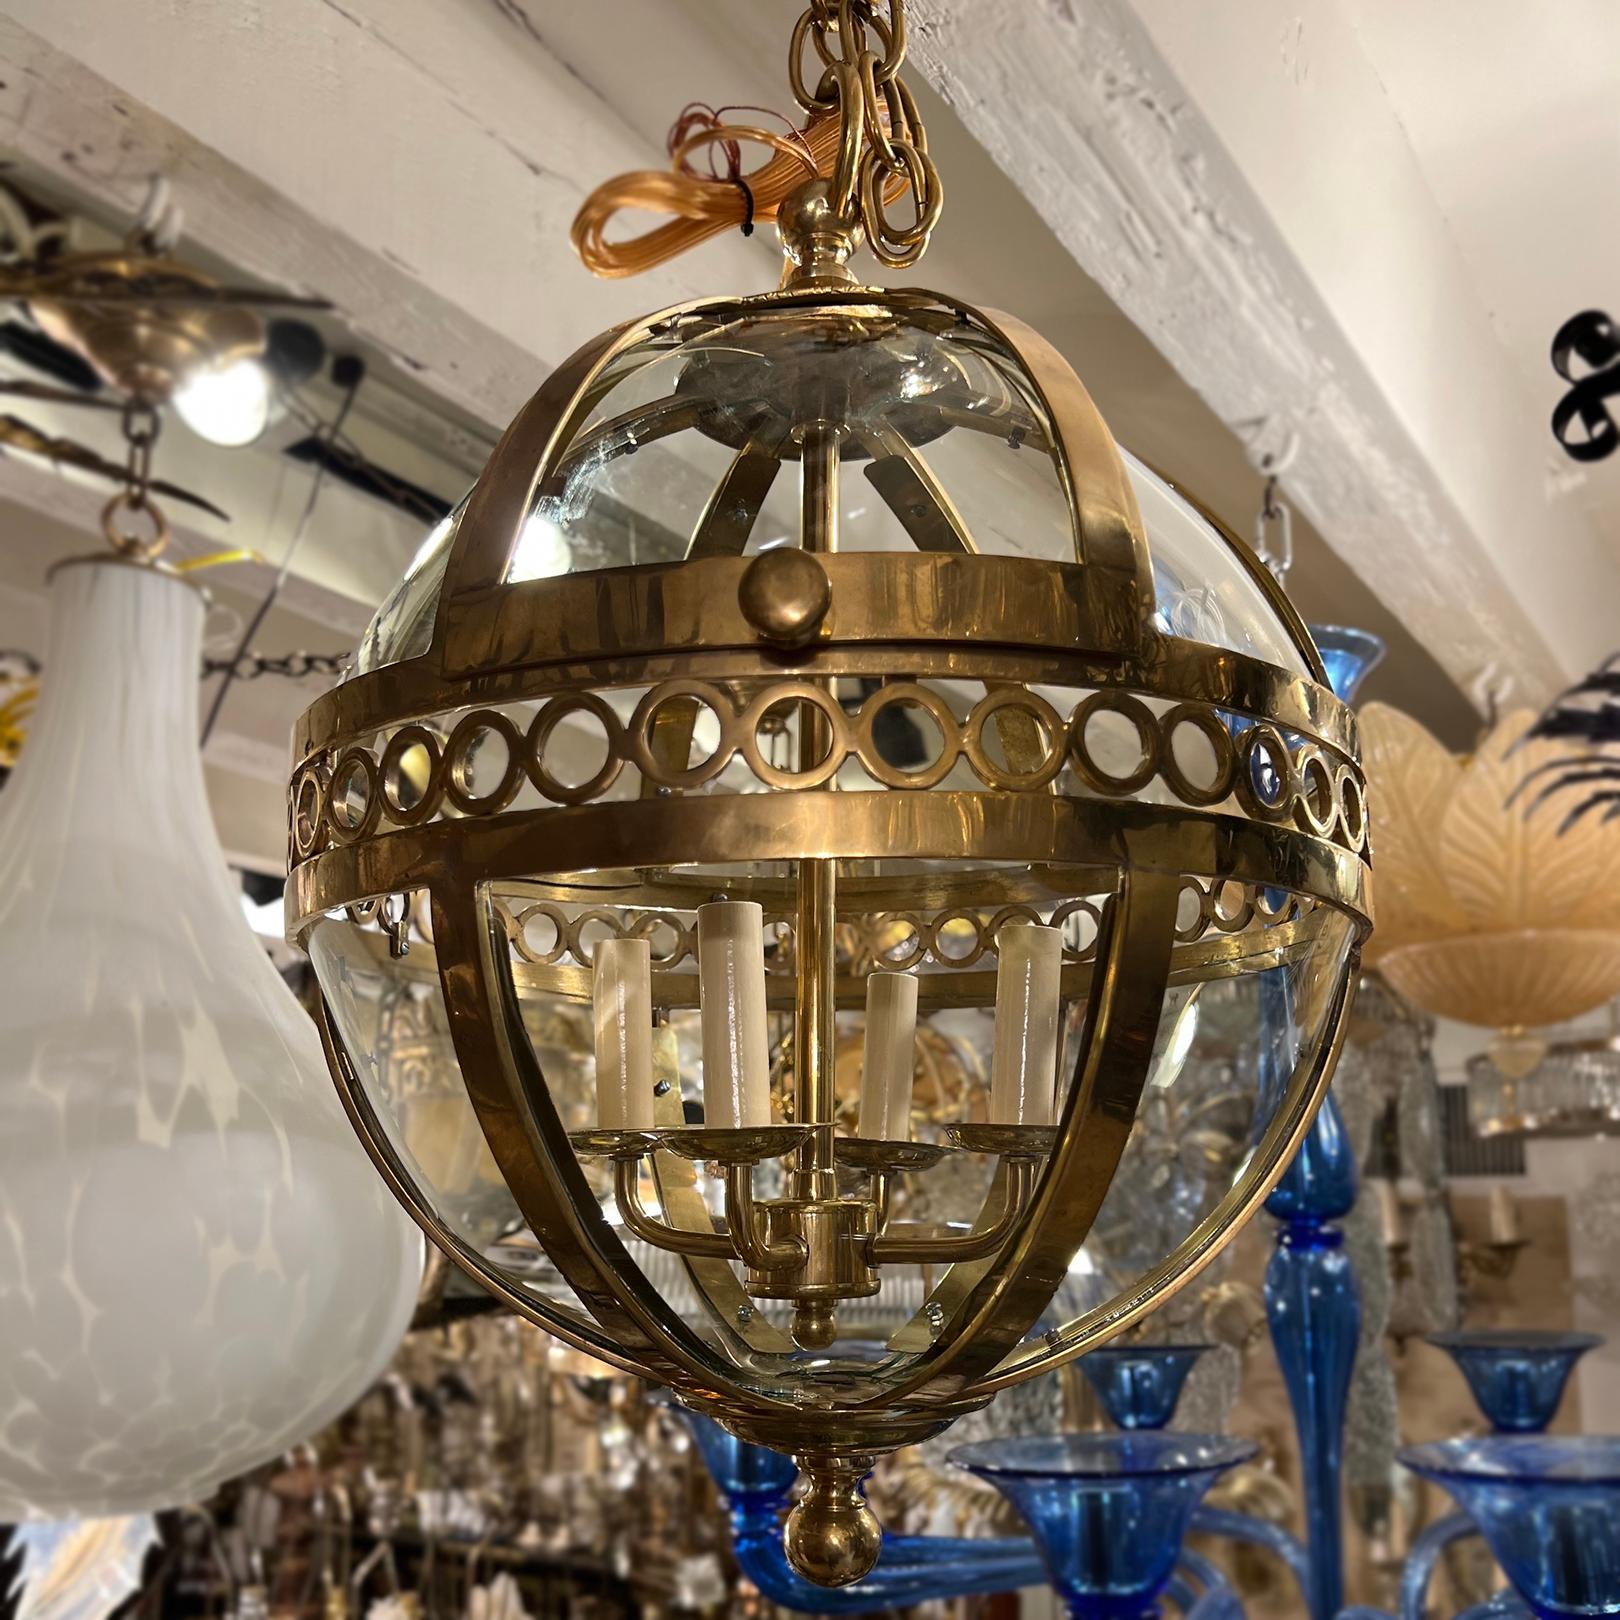 A set of three circa 1950's French cast bronze globe lanterns with four interior lights each. Sold individually. Can be dark patinated.

Measurements:
Minimum drop: 24
Diameter: 16.5